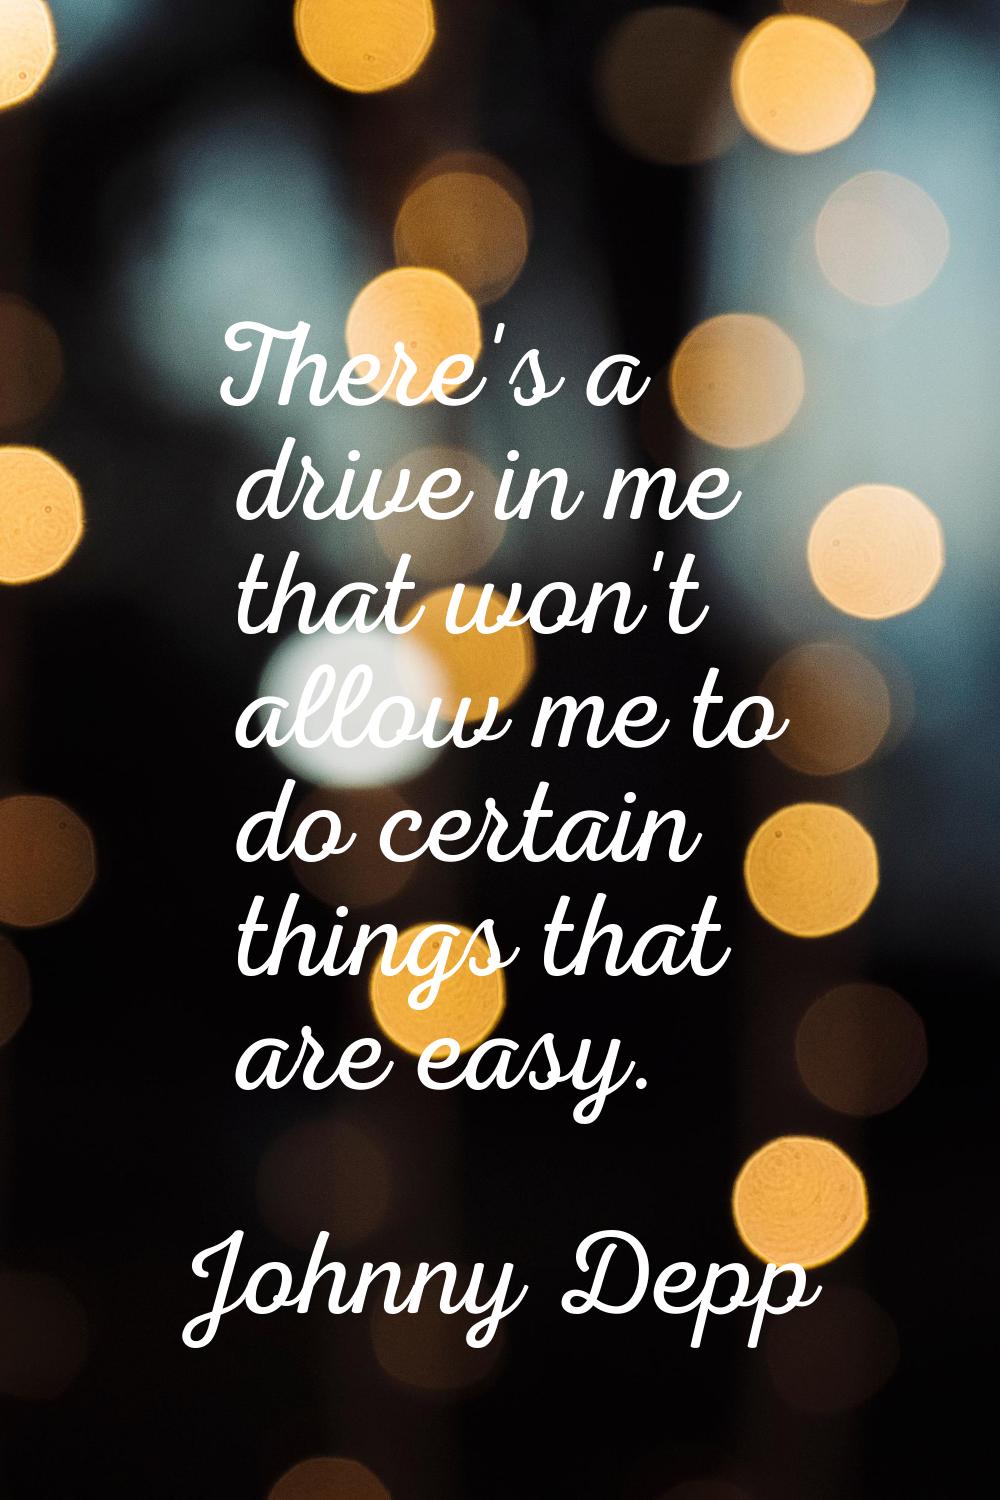 There's a drive in me that won't allow me to do certain things that are easy.